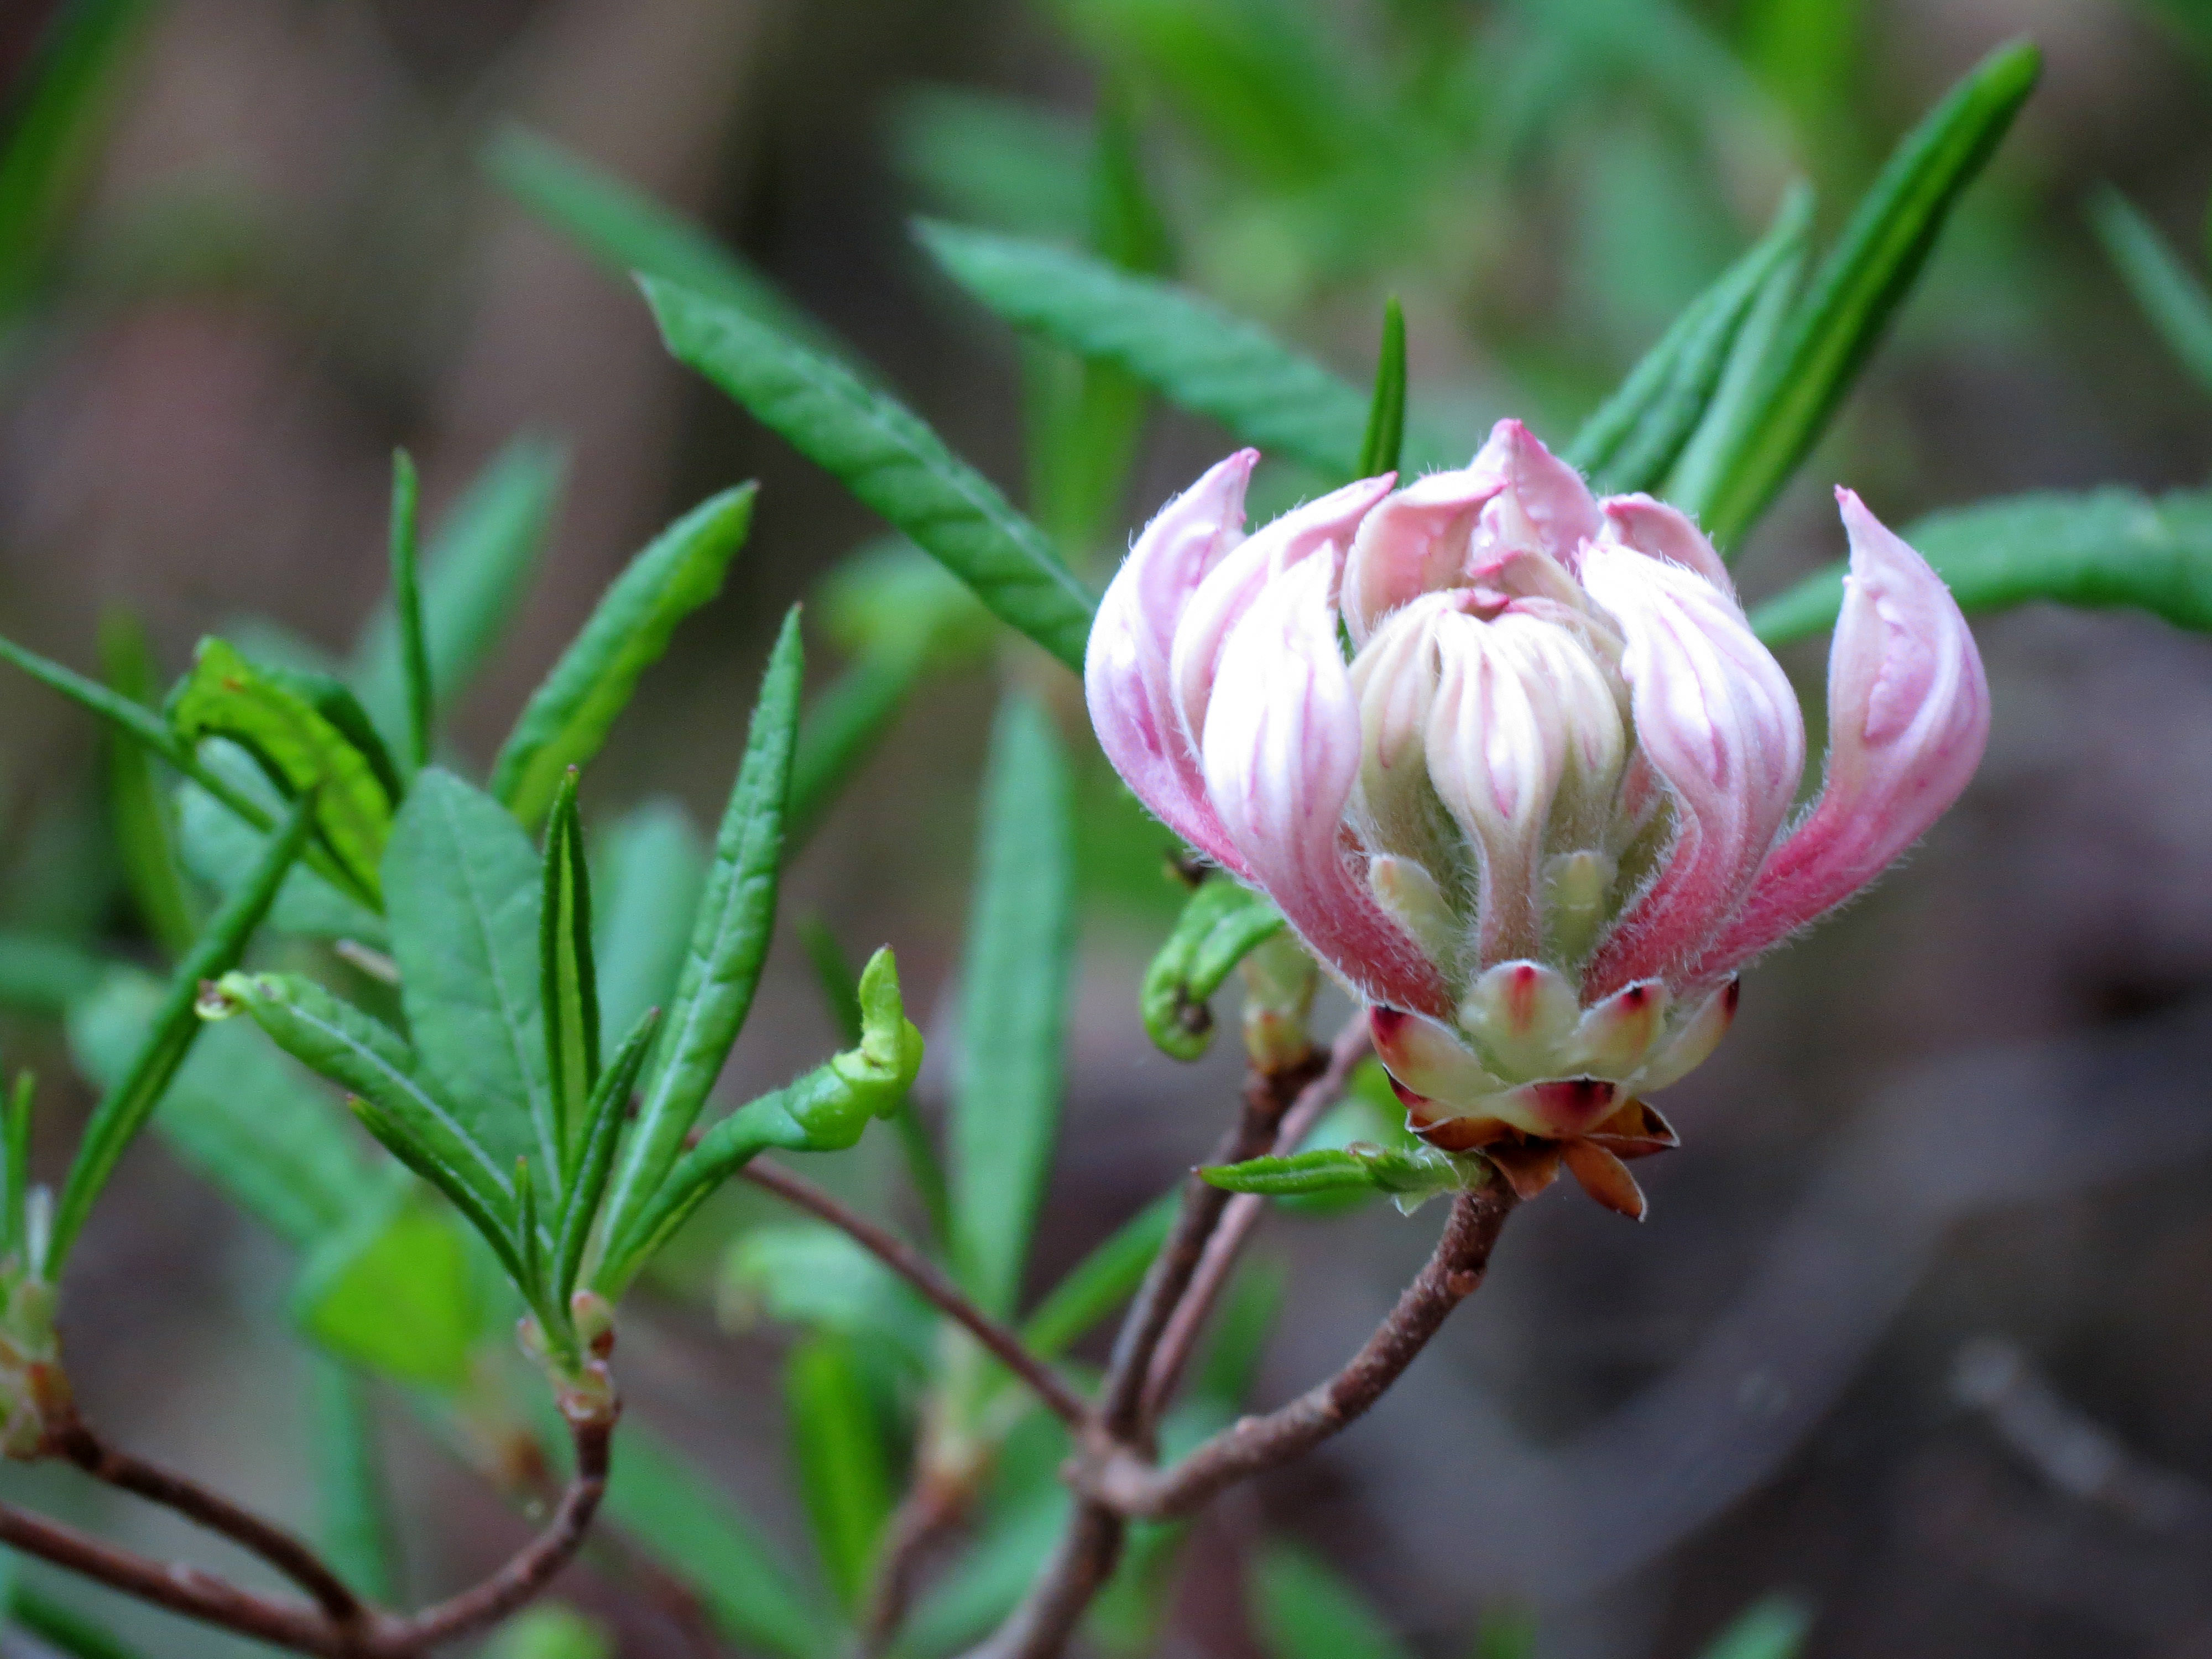 A pink flower blooms at the end of a woody stem.